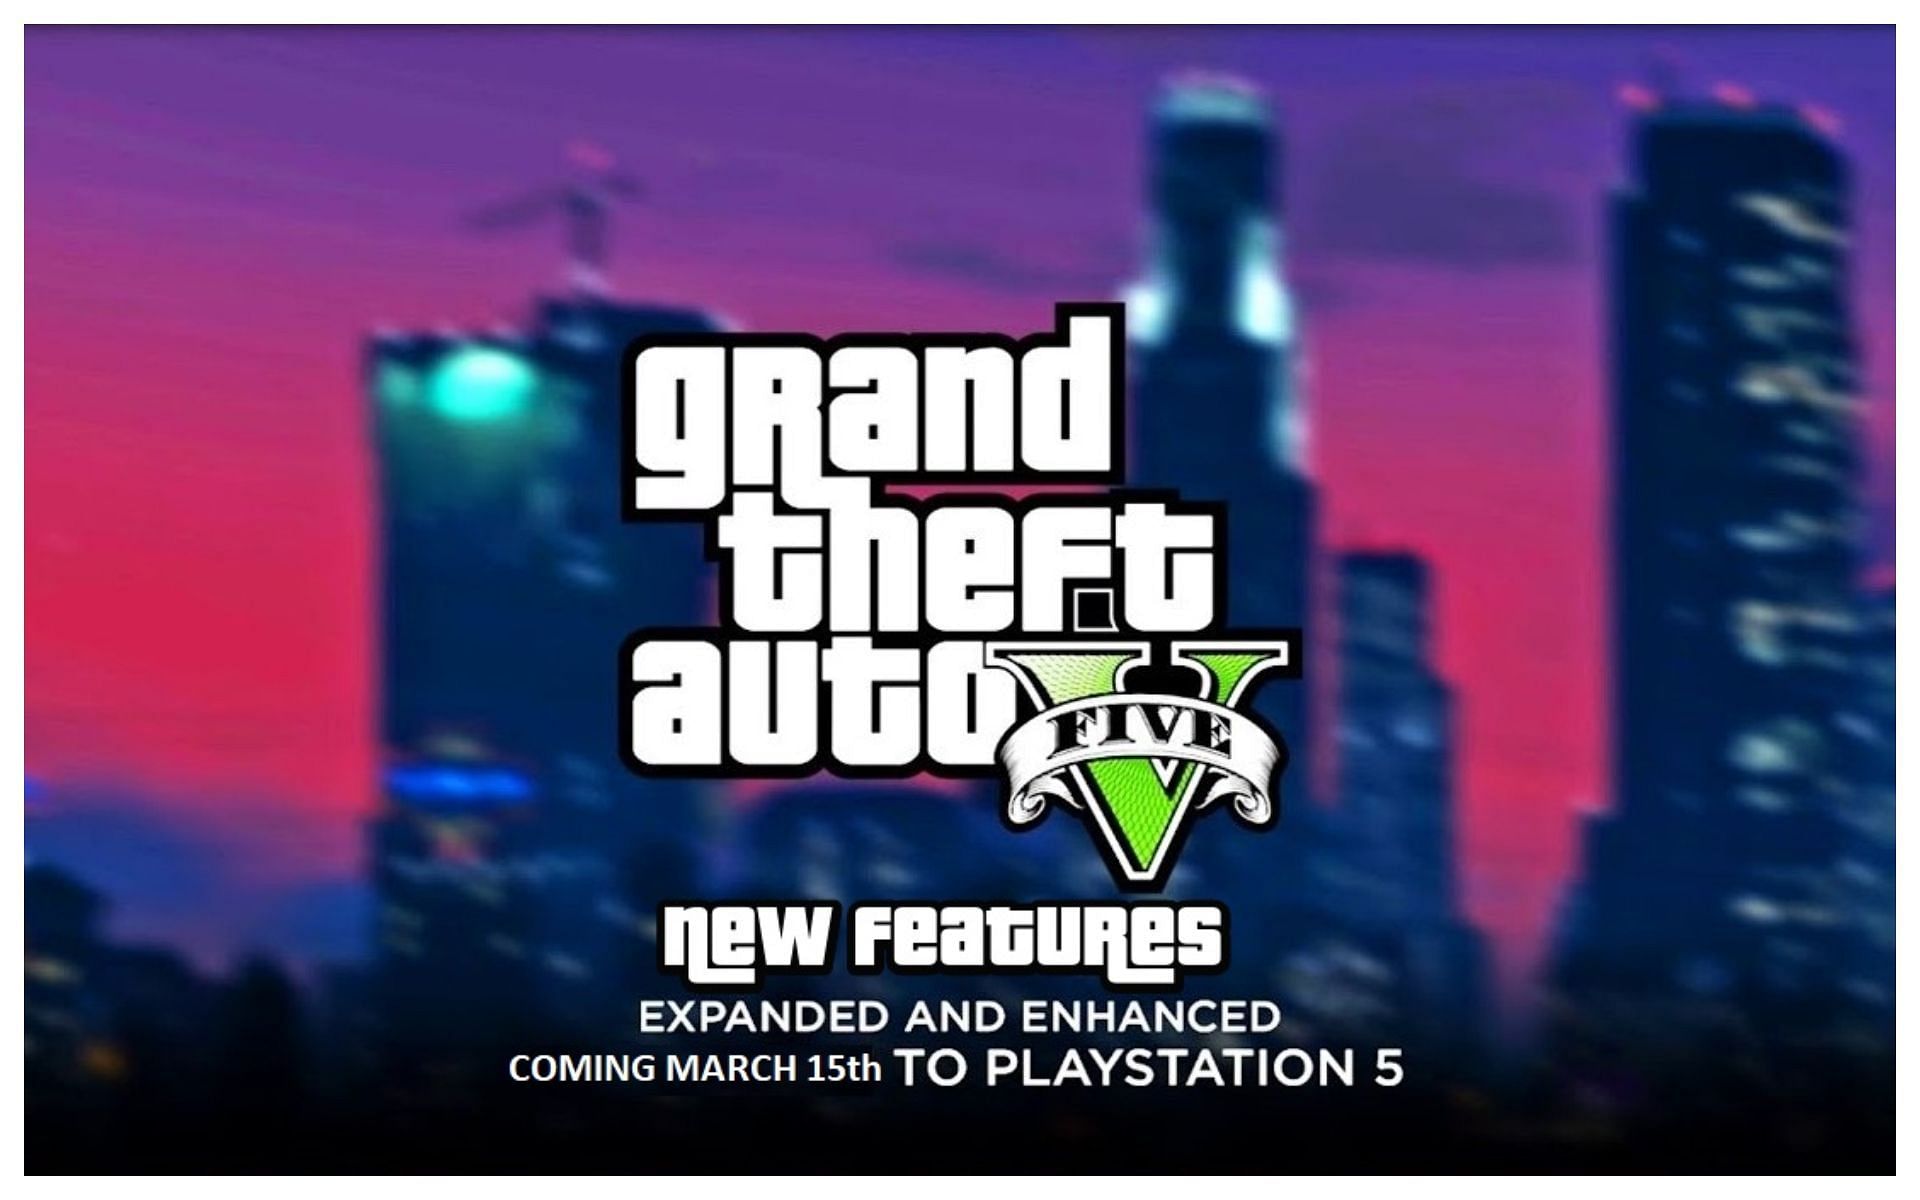 GTA 5 Expanded and Enhanced new features Graphics modes, save transfer